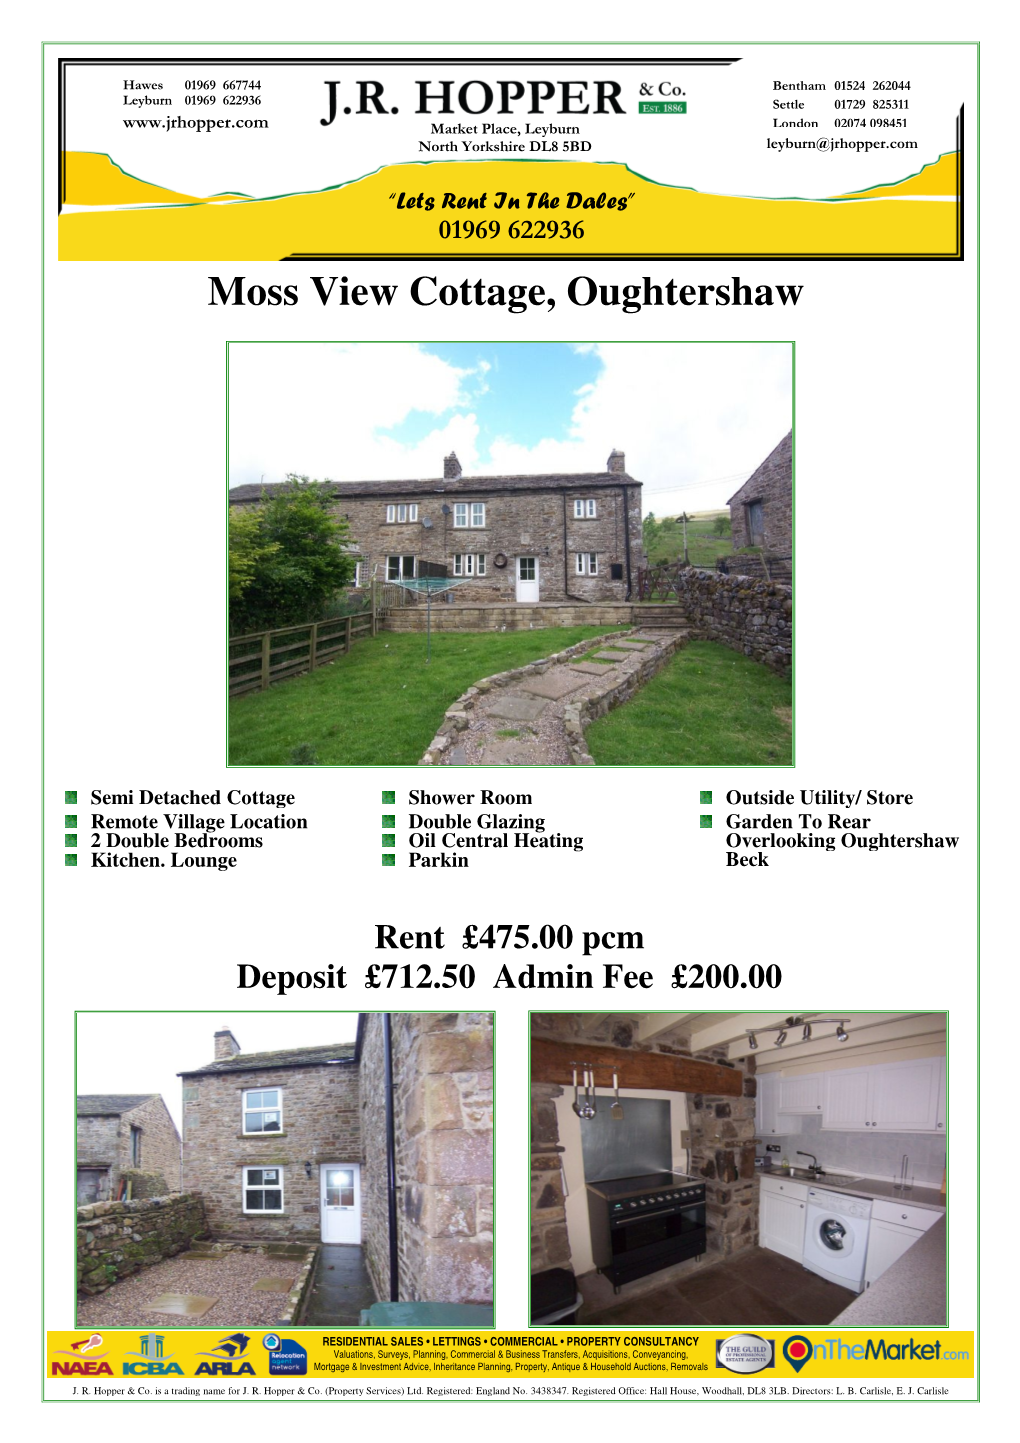 Moss View Cottage, Oughtershaw